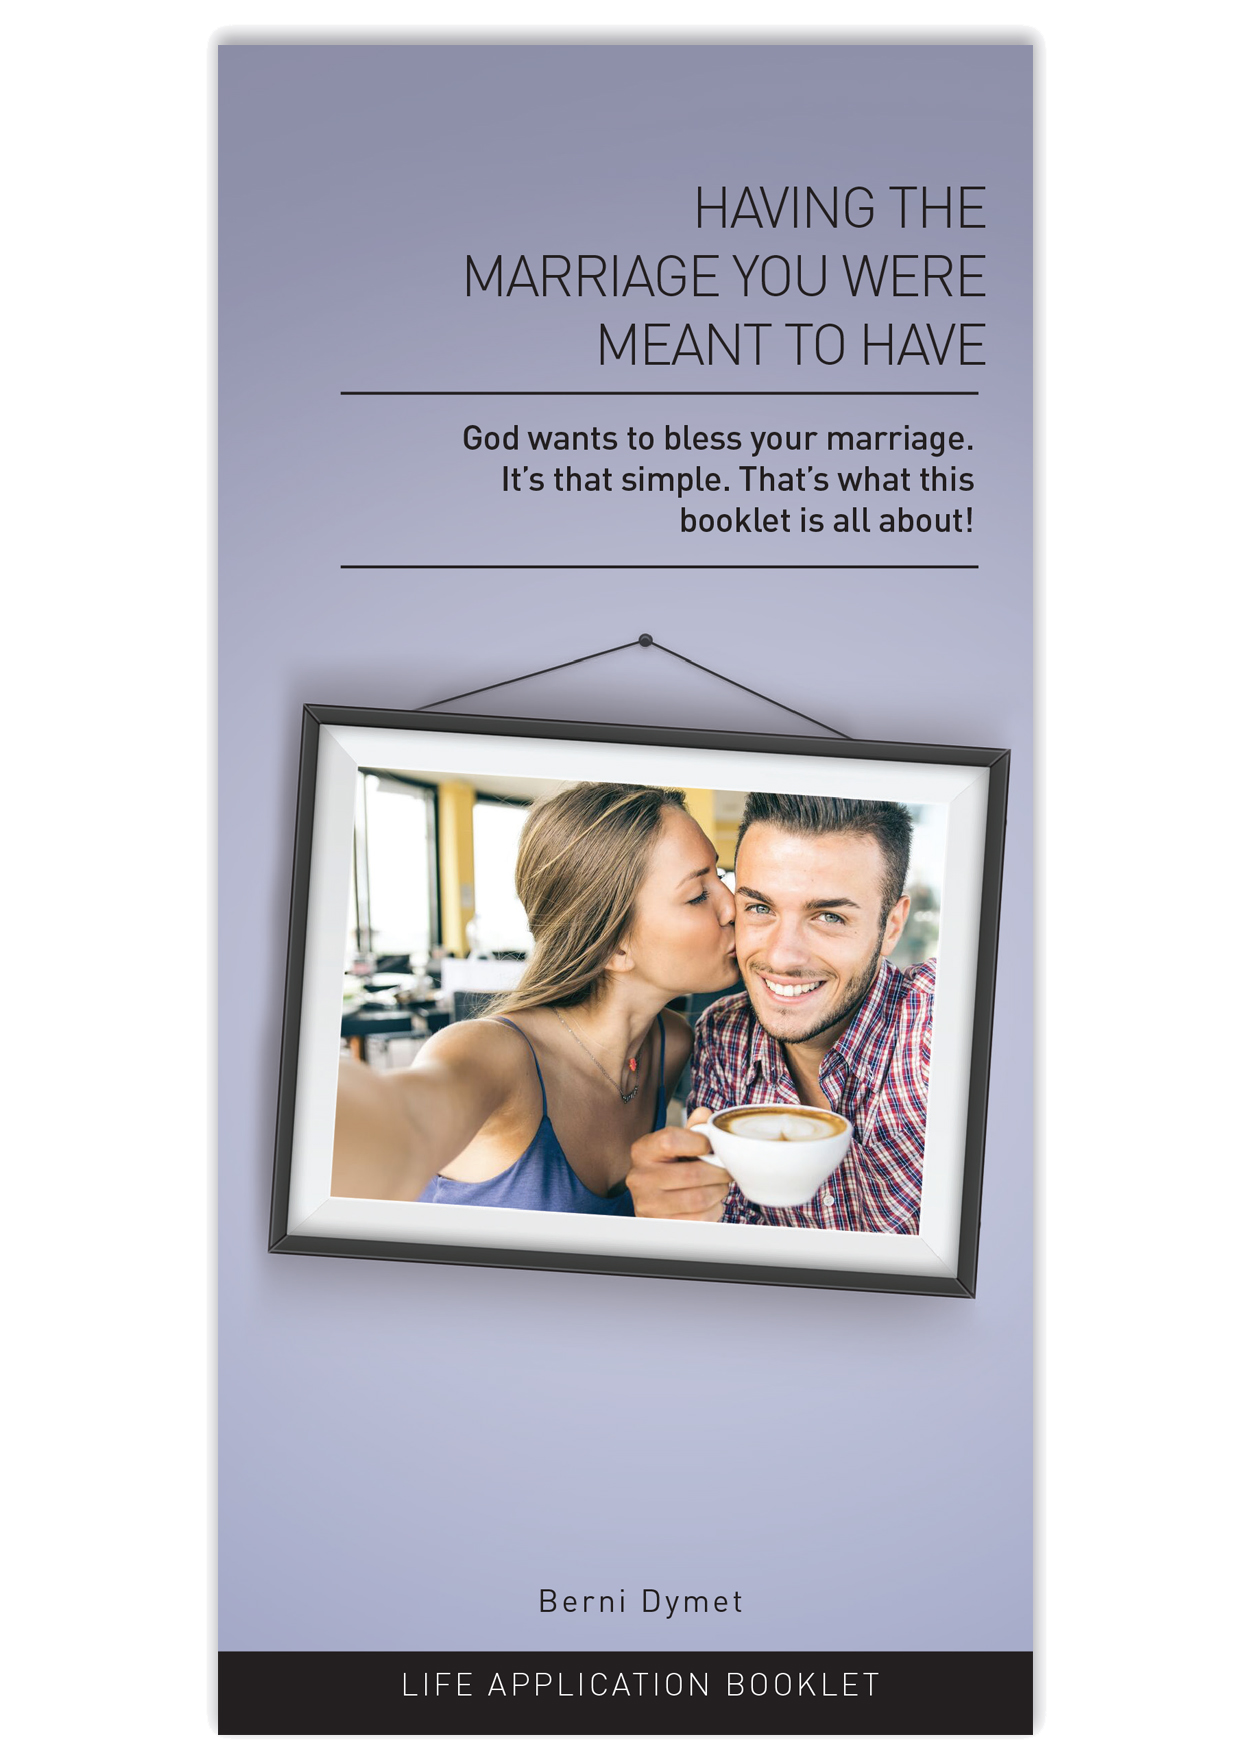 Having the Marriage You were Meant to Have - image